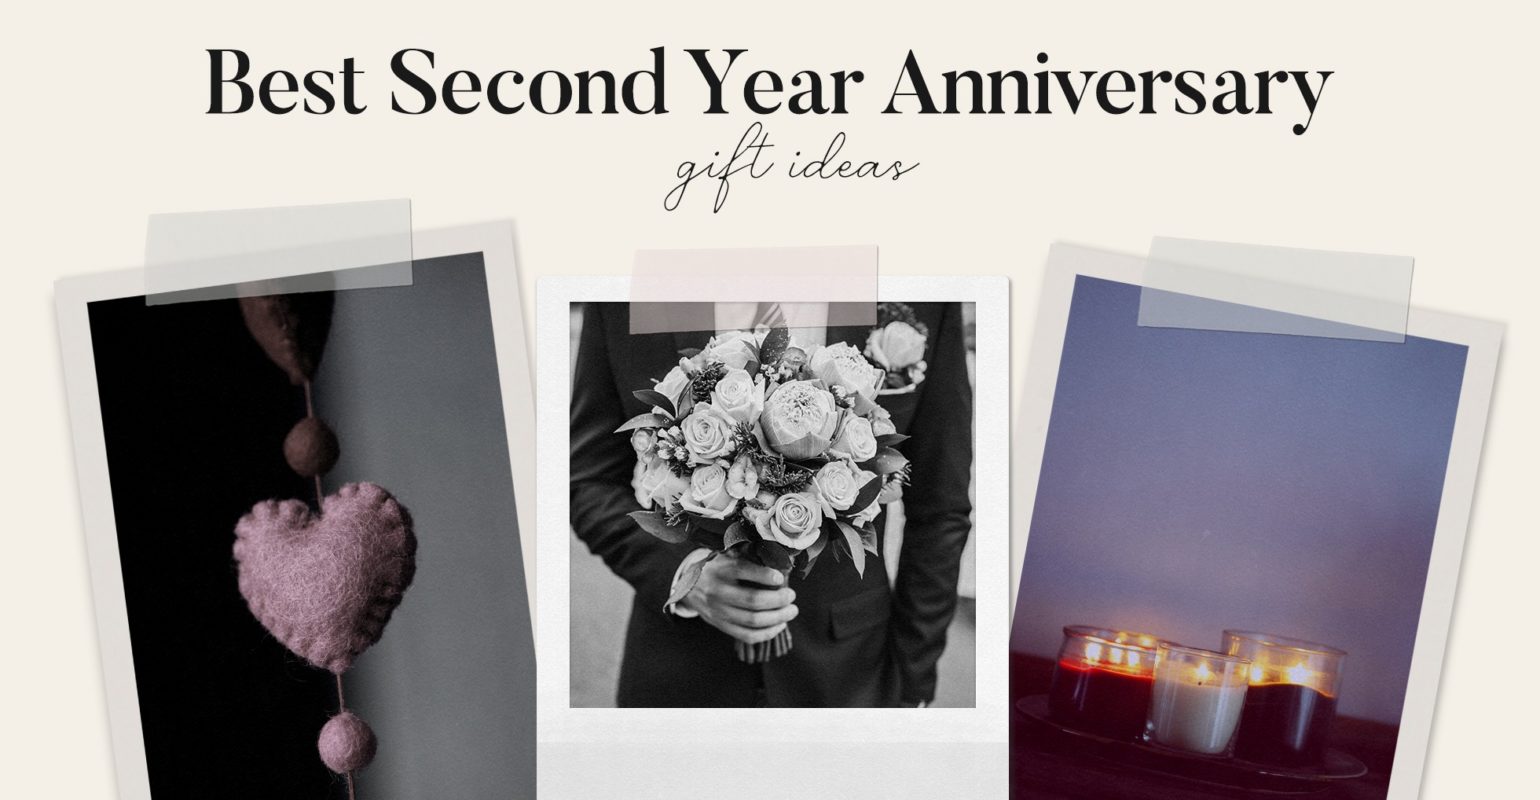 7 Best 2nd Year Anniversary Gift Ideas Guide